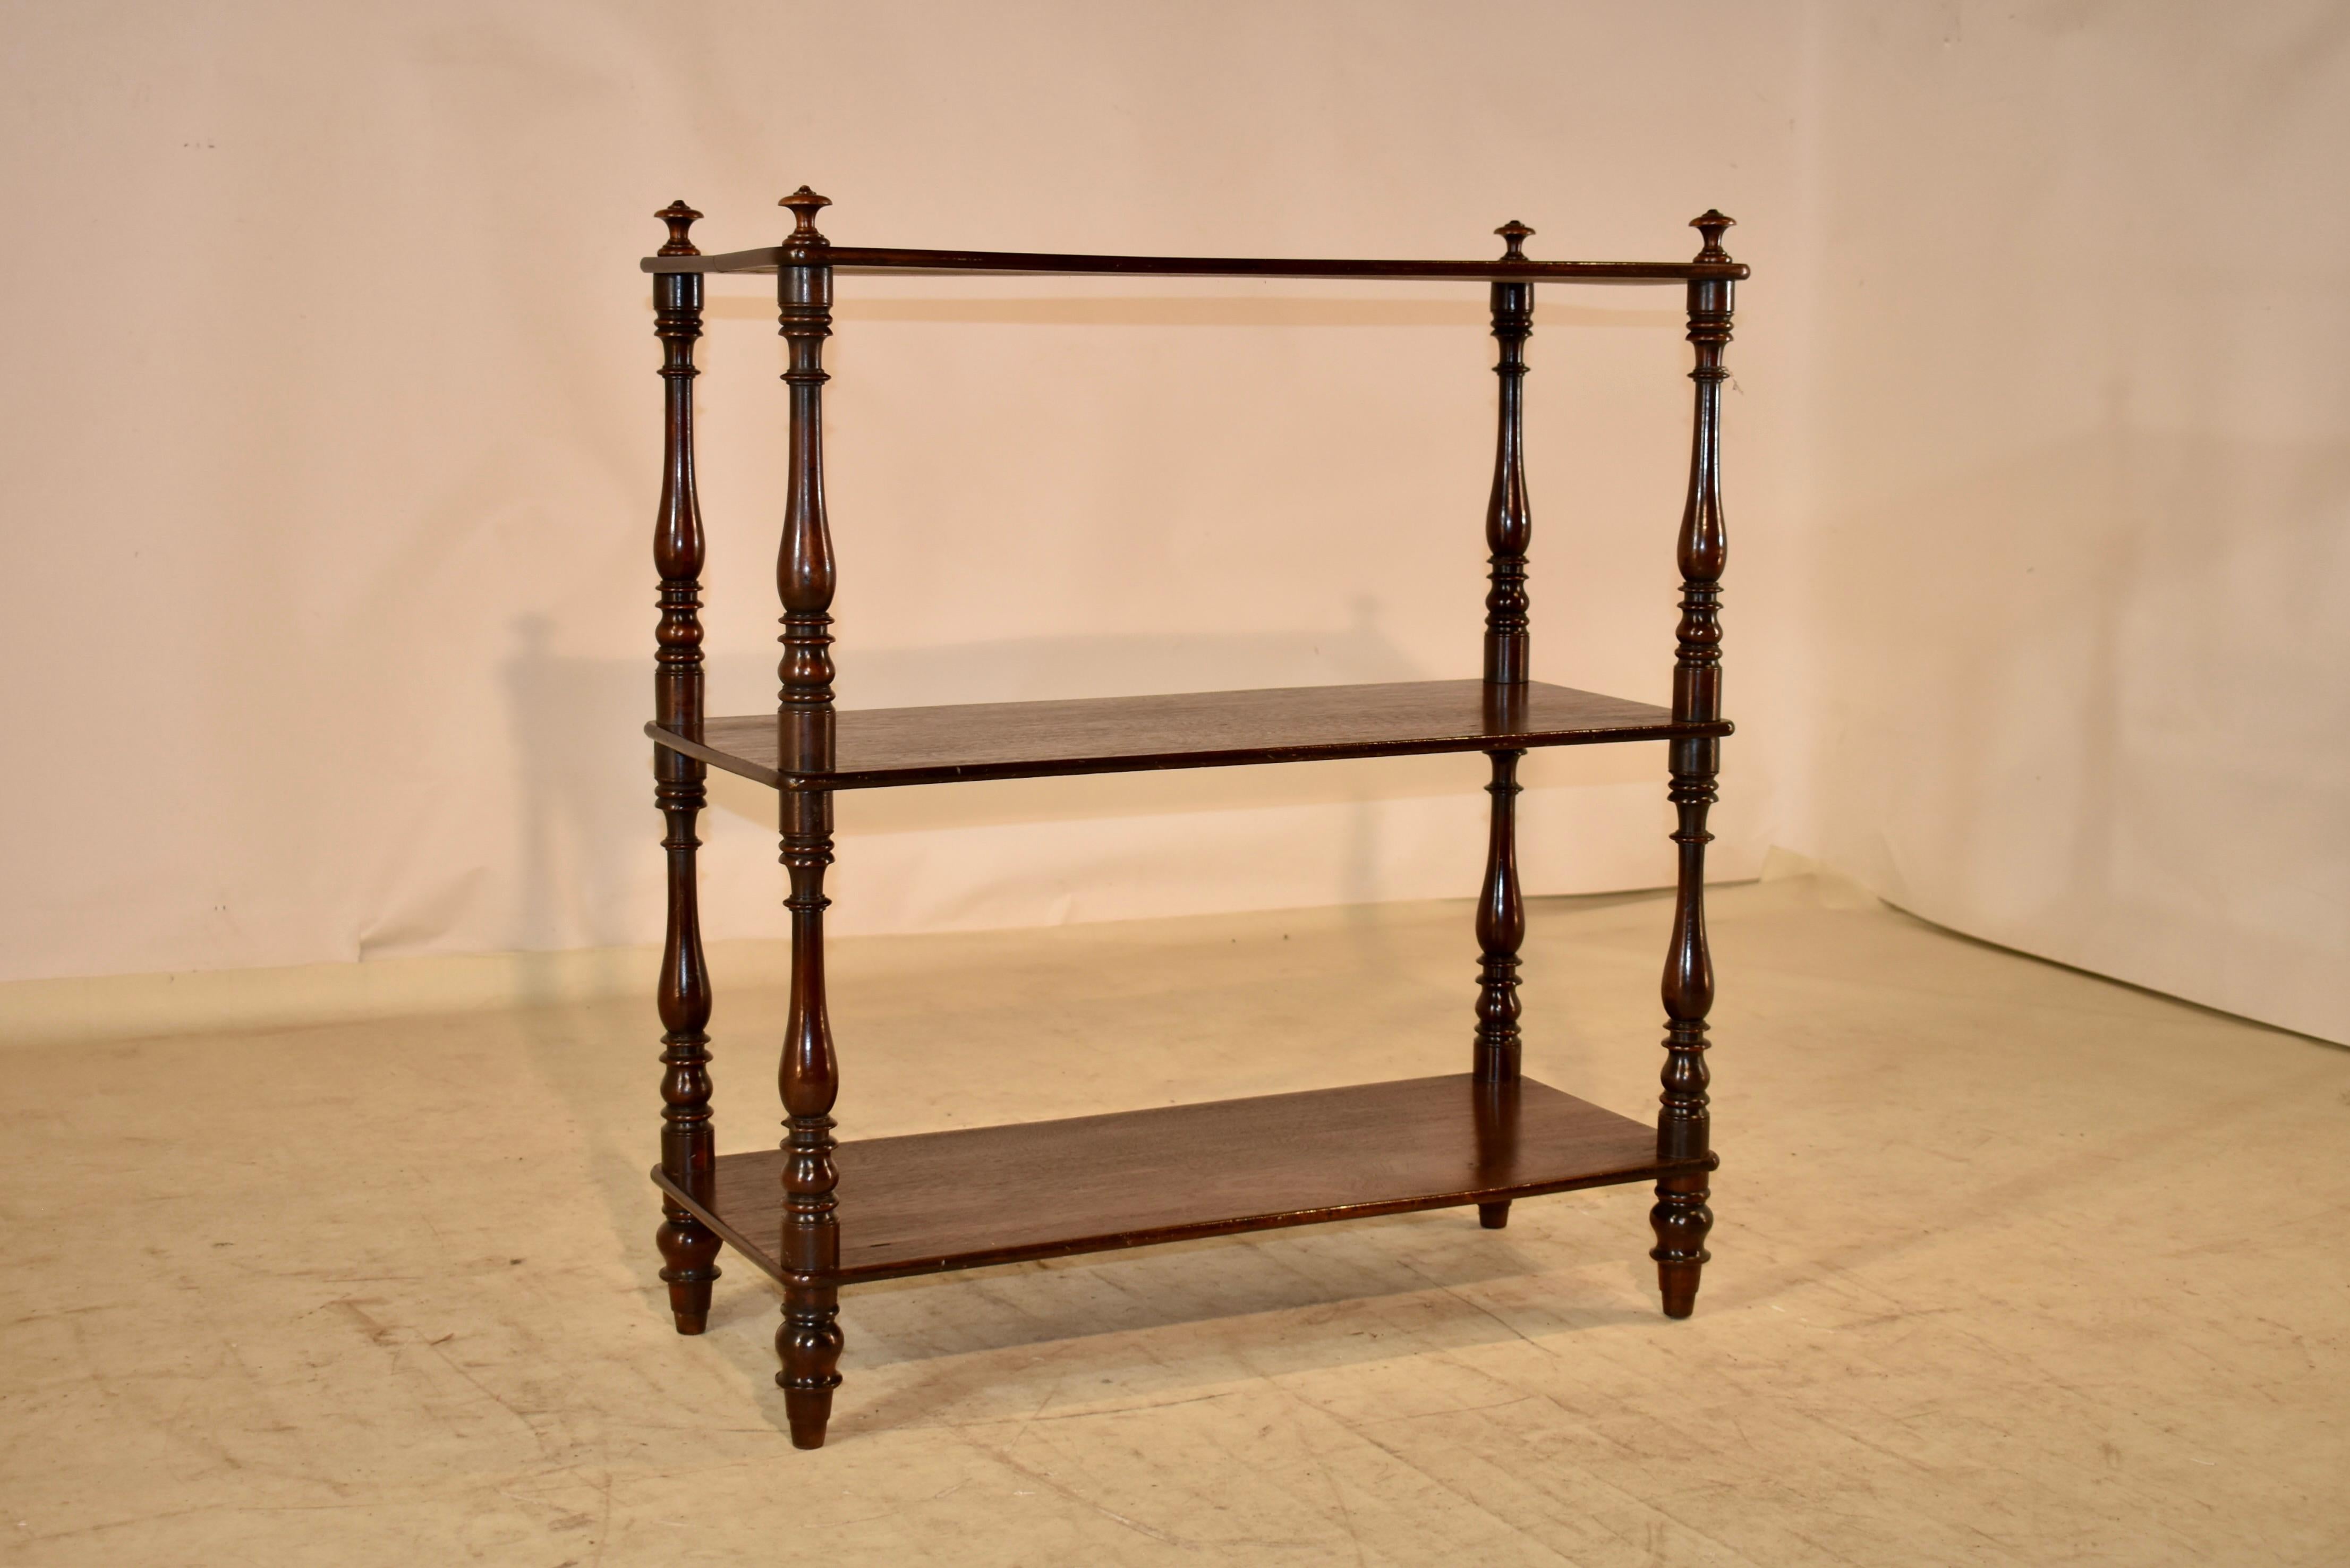 19th century mahogany shelf from England. There are finials on the top of the shelf, over three shelves, all separated by hand turned shelf supports. The feet are hand turned as well and the shelf has an overall rich feel.